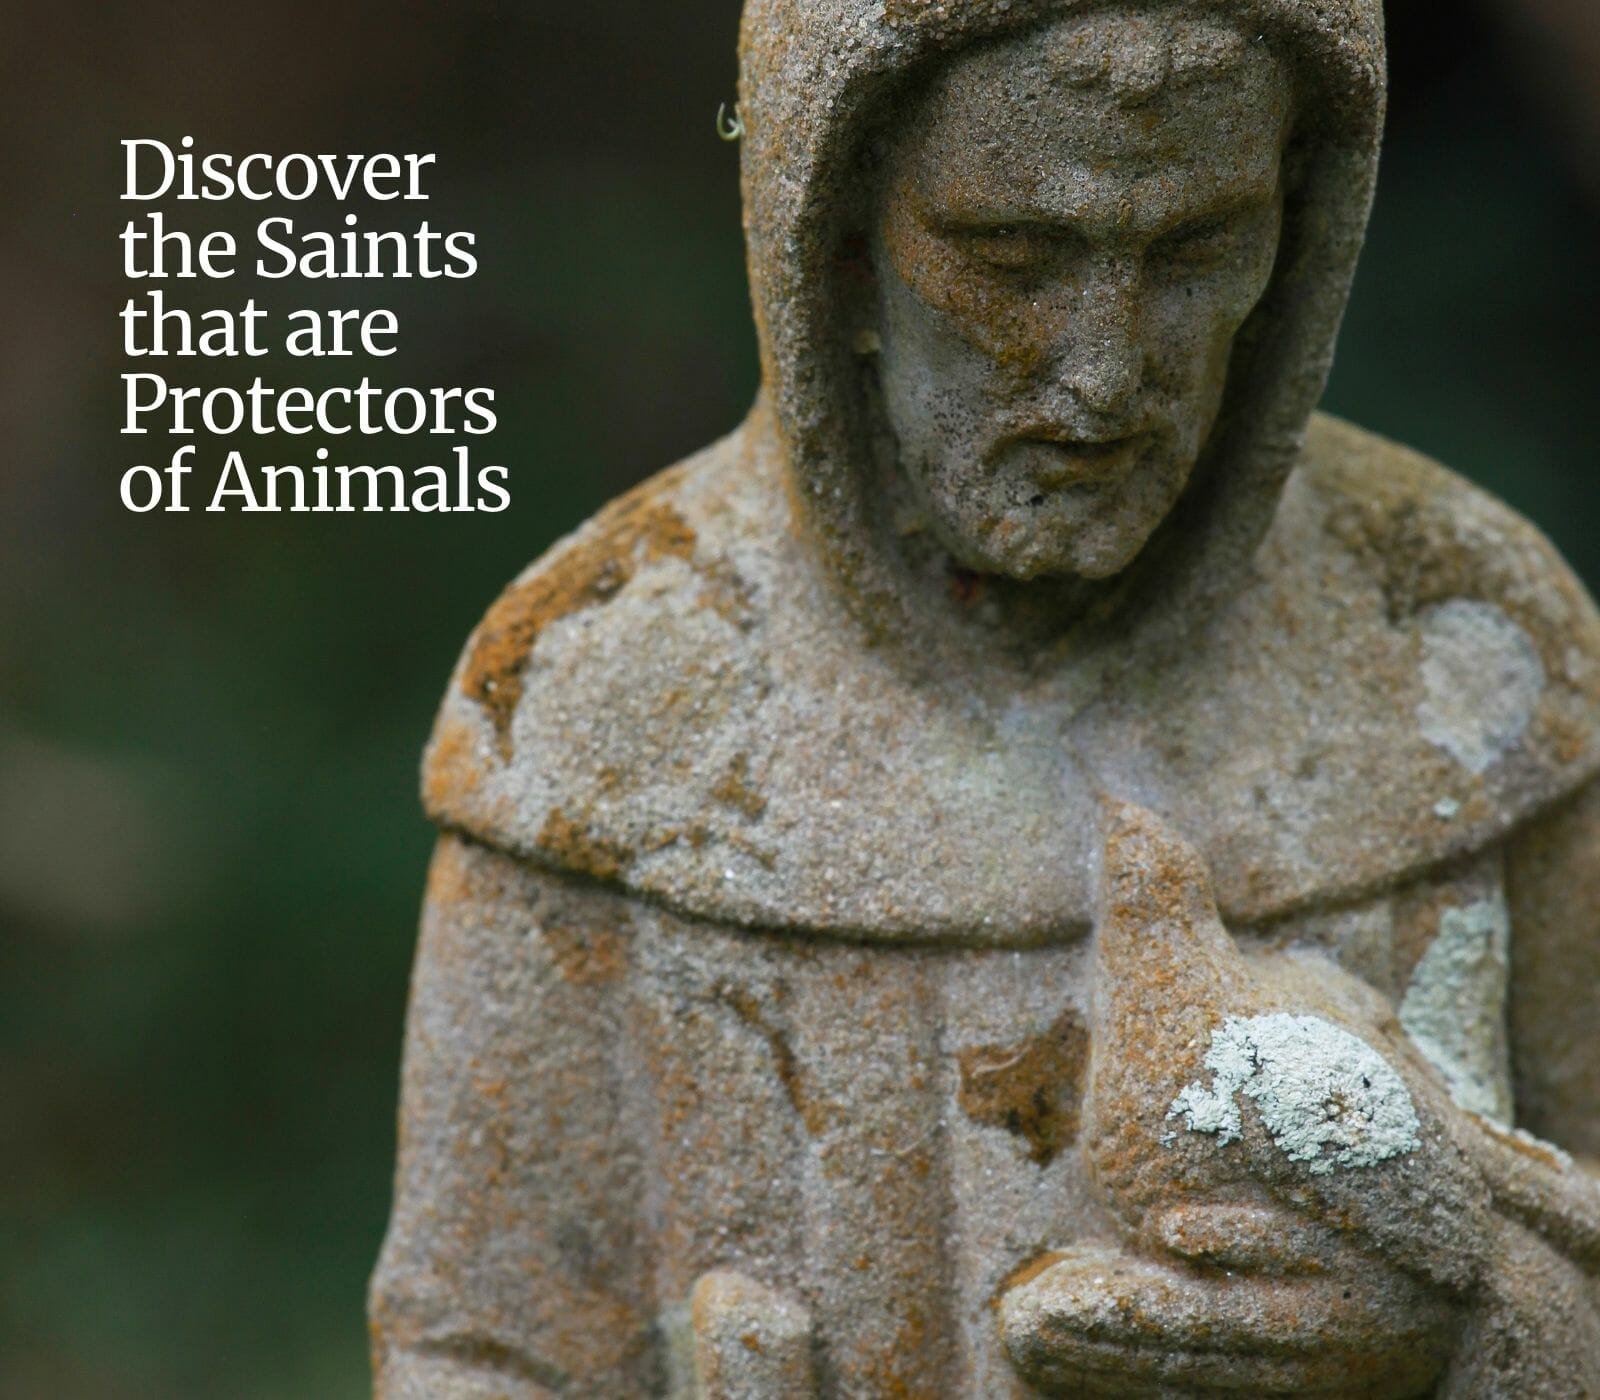 Discover the Saints that are Protectors of Animals